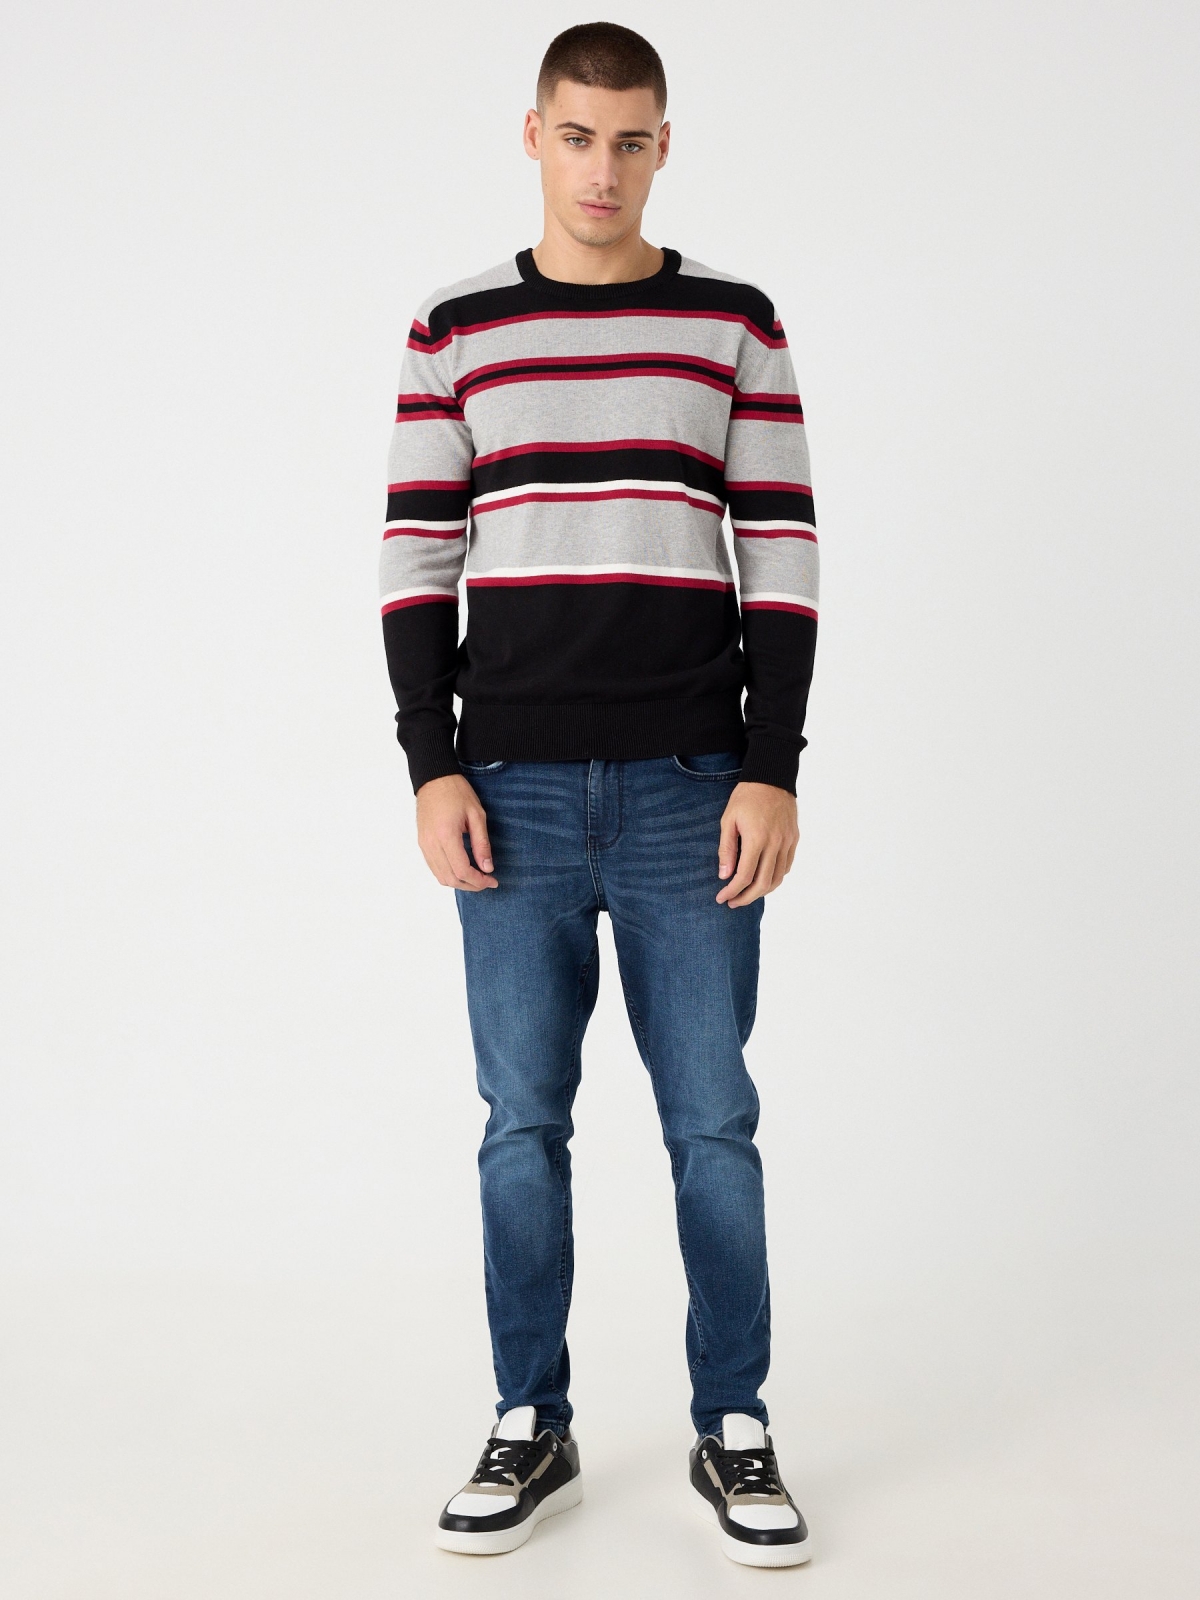 Striped knitted sweater black front view